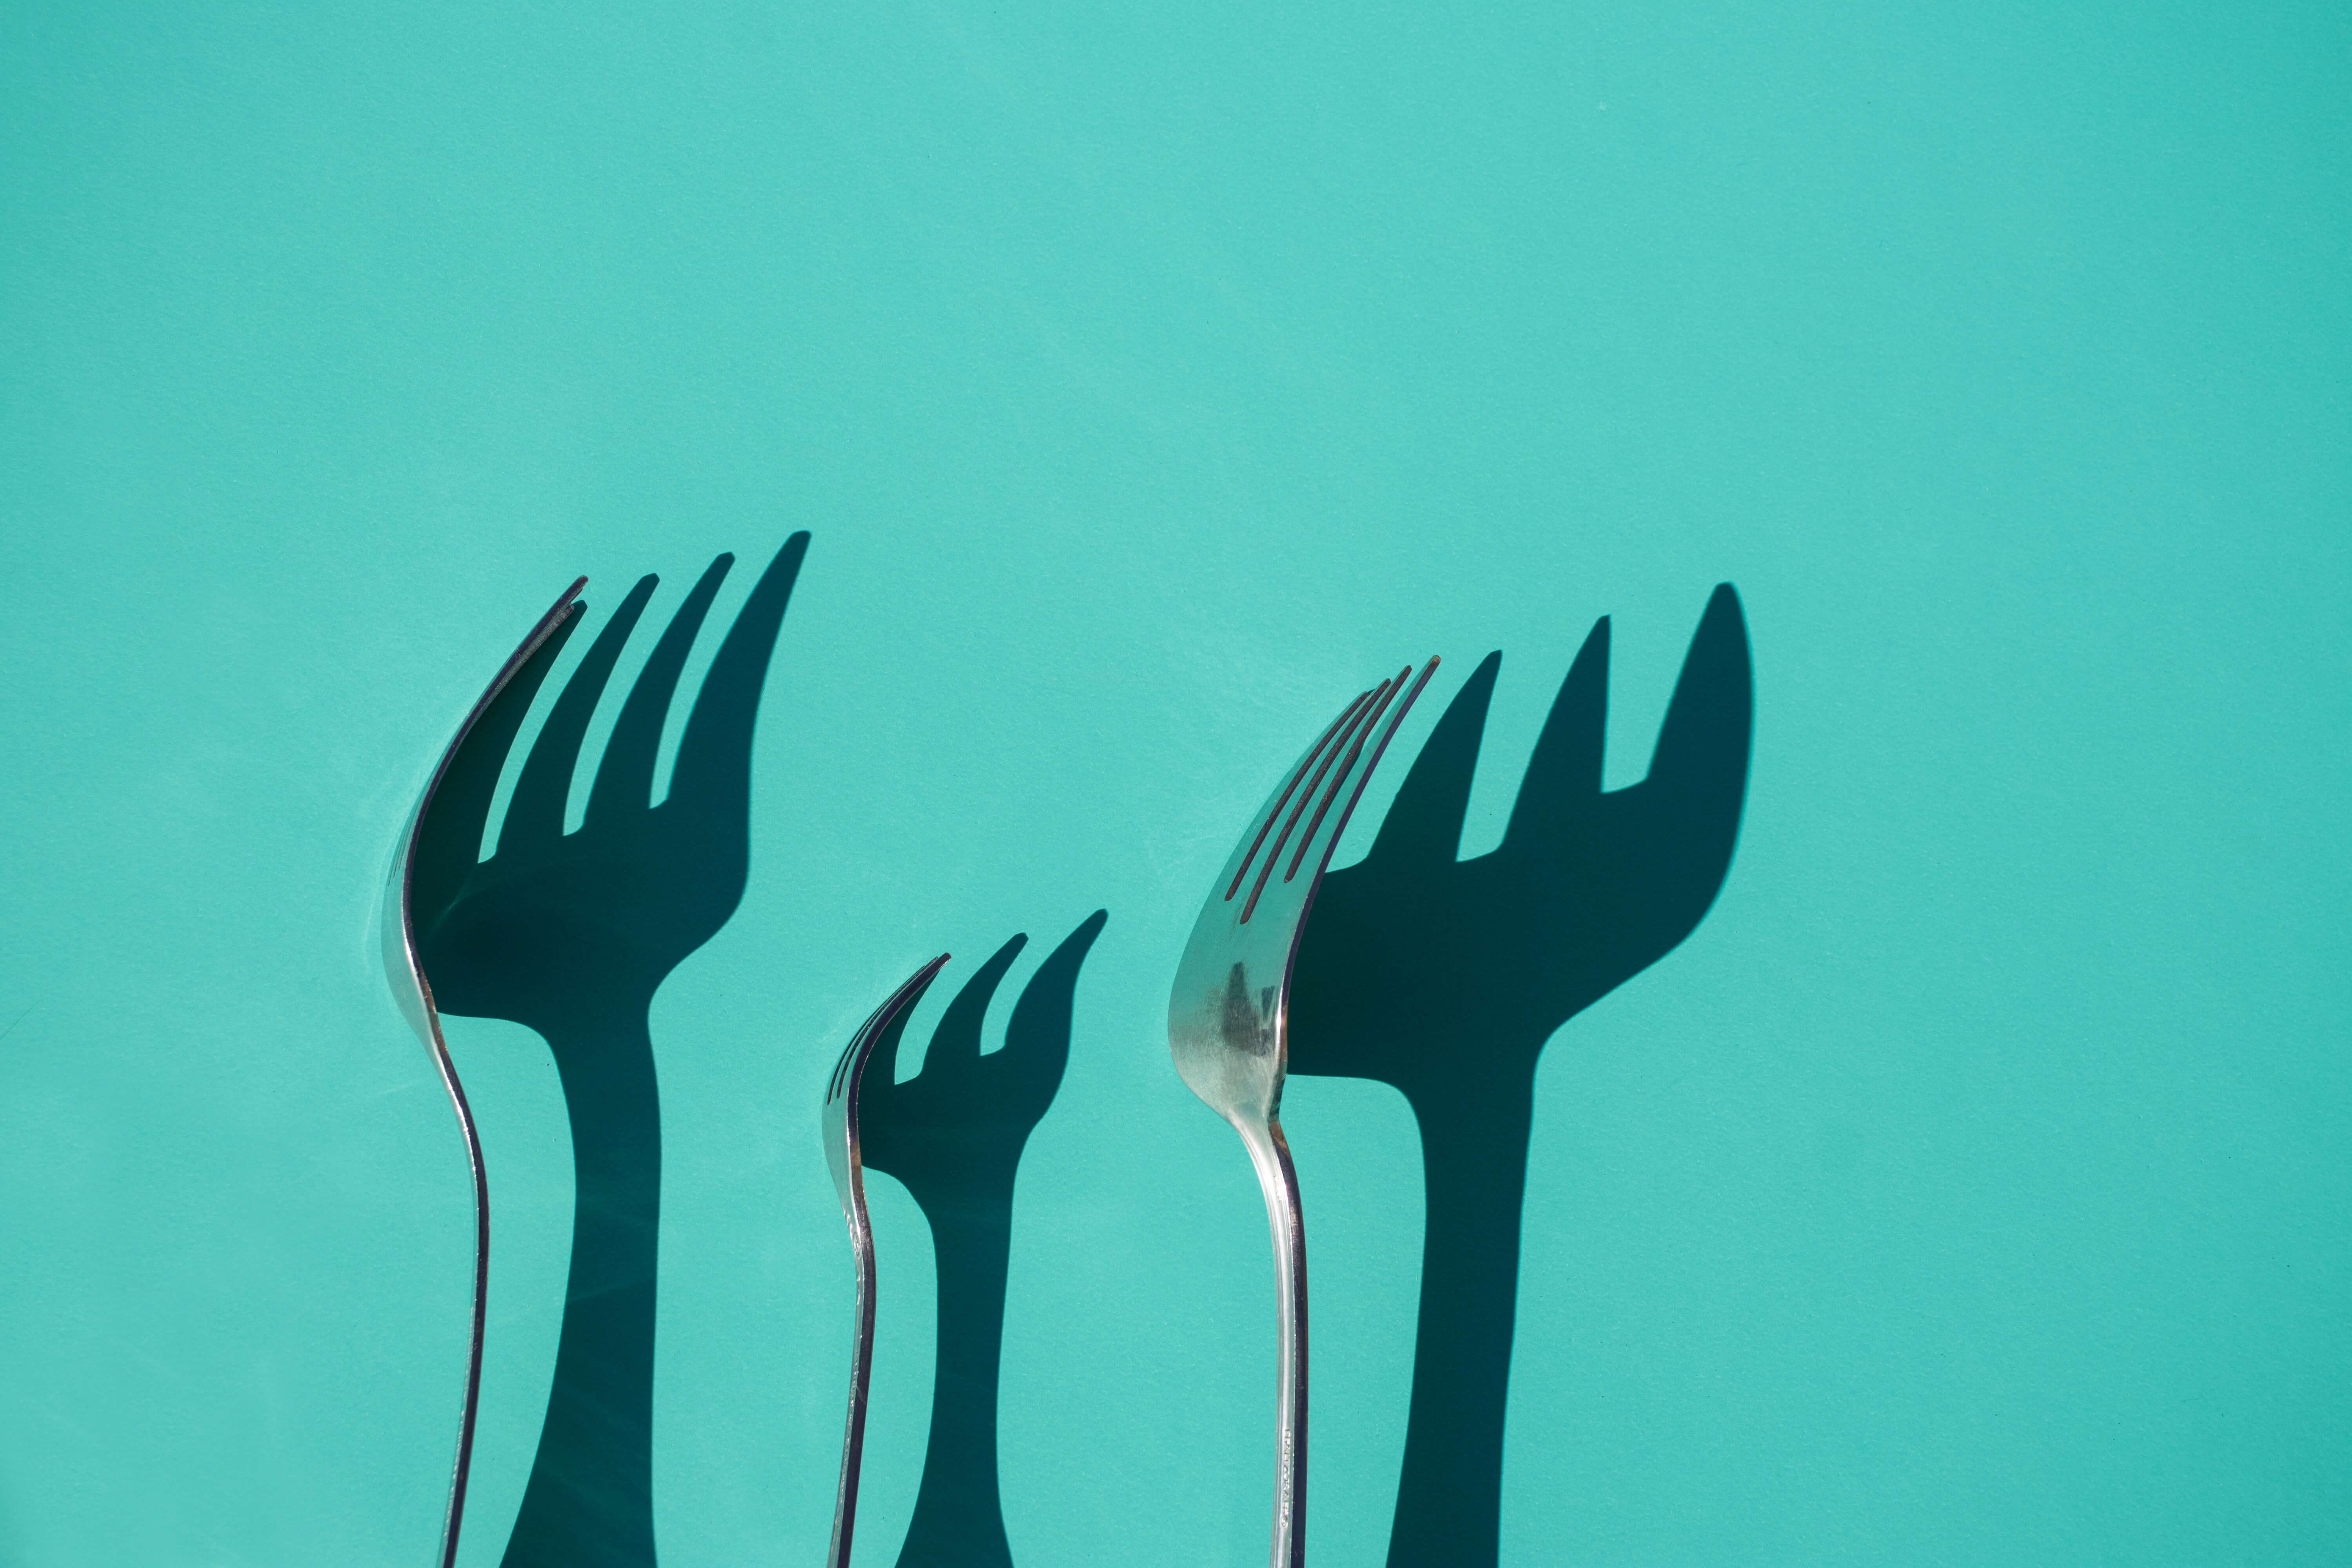 Three forks and their shadows falling on a green background